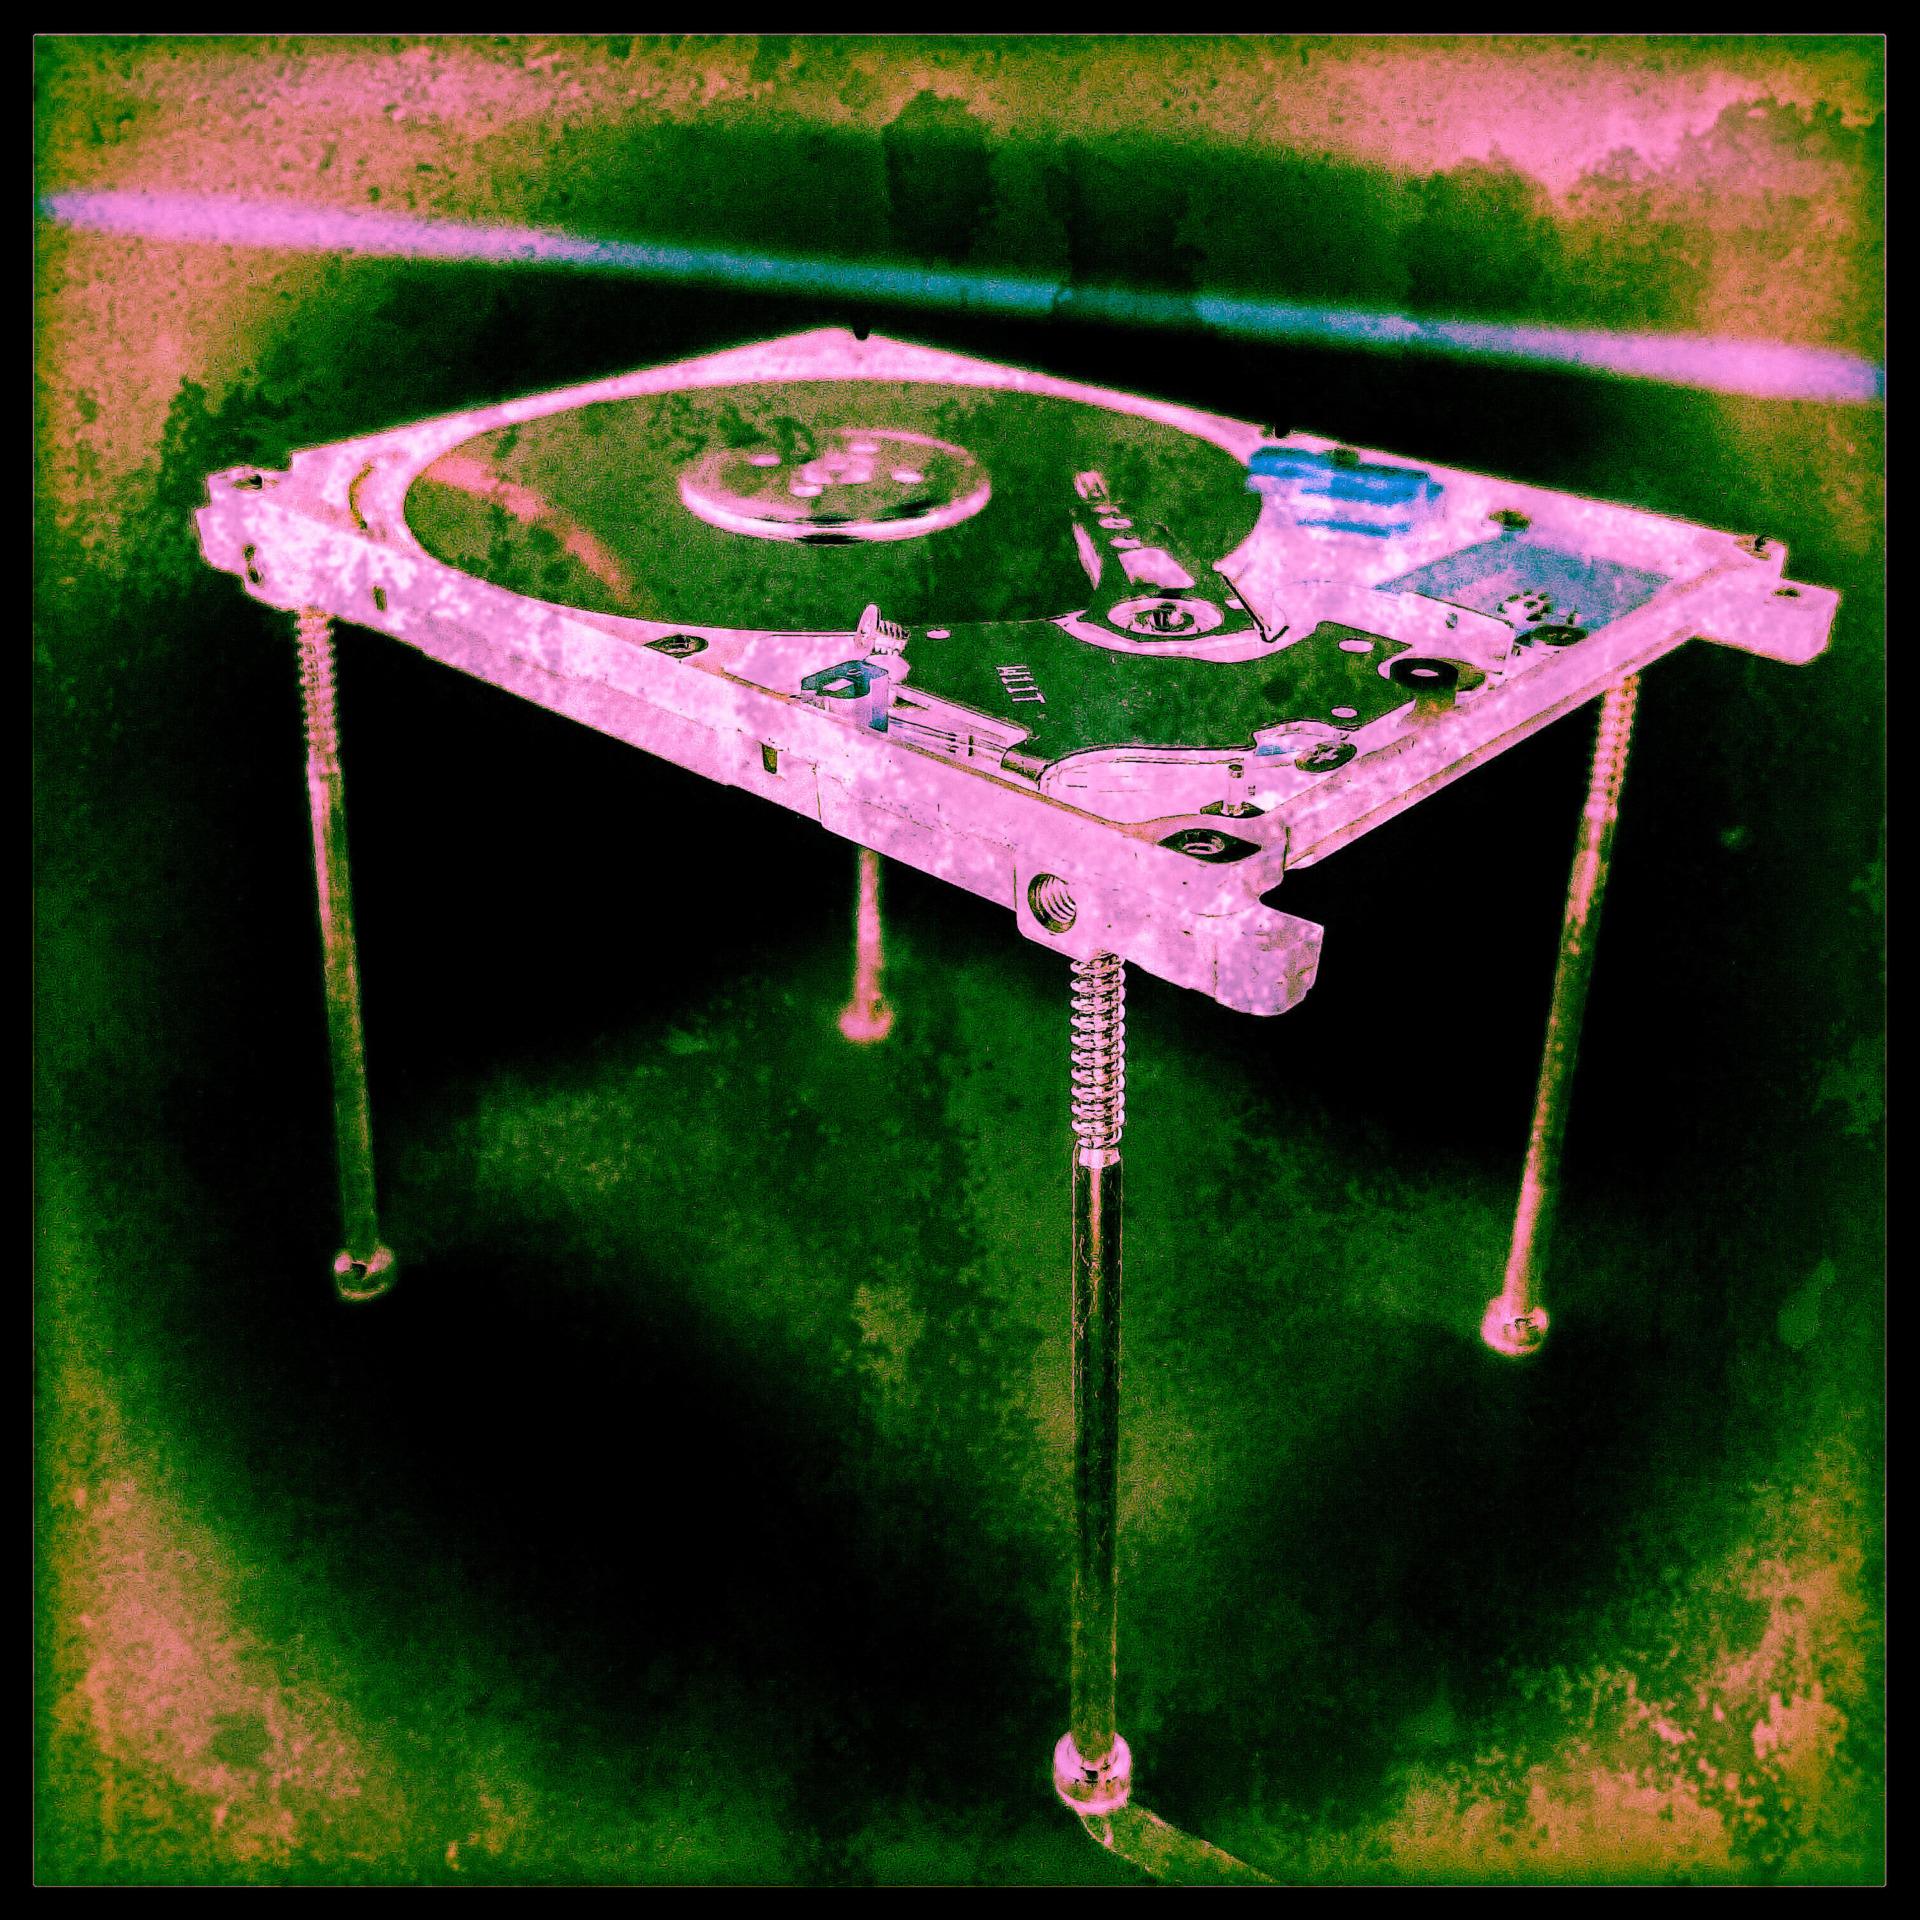 Negative image of turntable